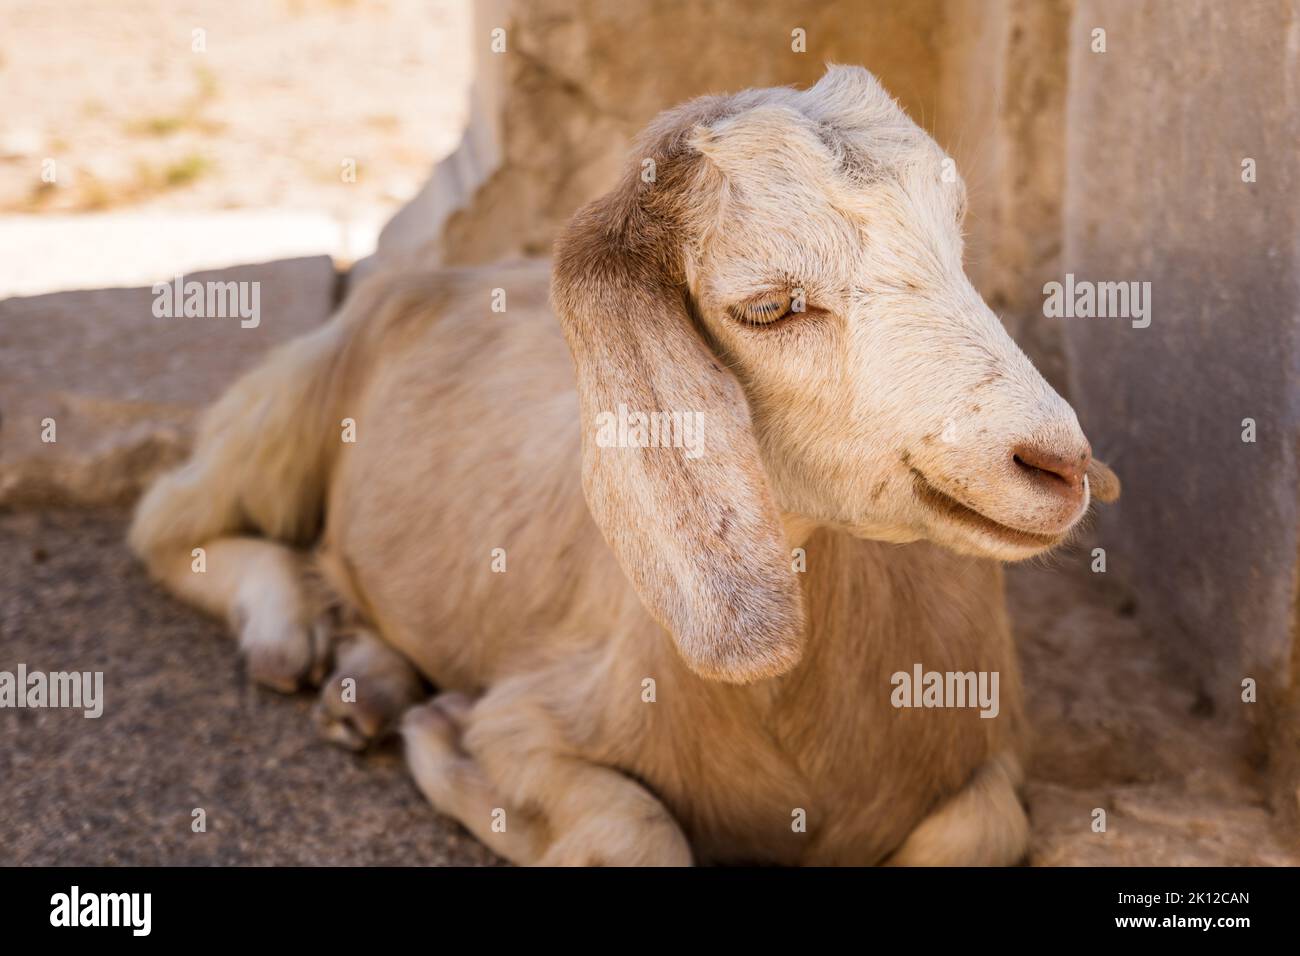 Goat looking to the camera sitting. Cute goat face portrait in summer dry climate, vertical photo Stock Photo